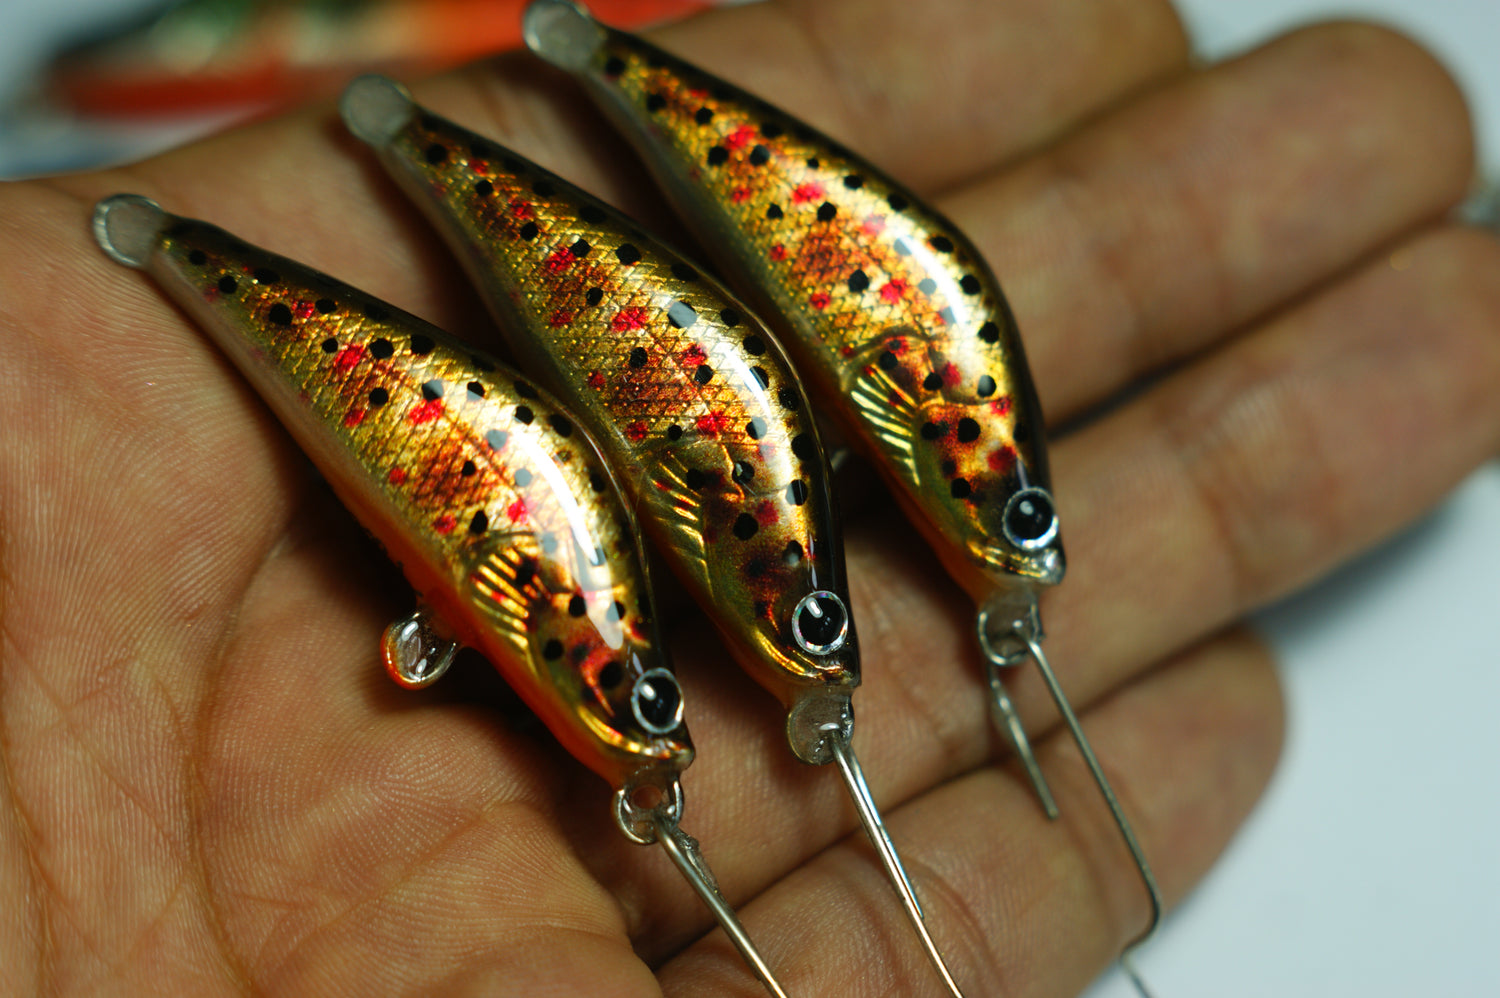 Brown Trout Fishing Lure Restless7 75mm -  Canada